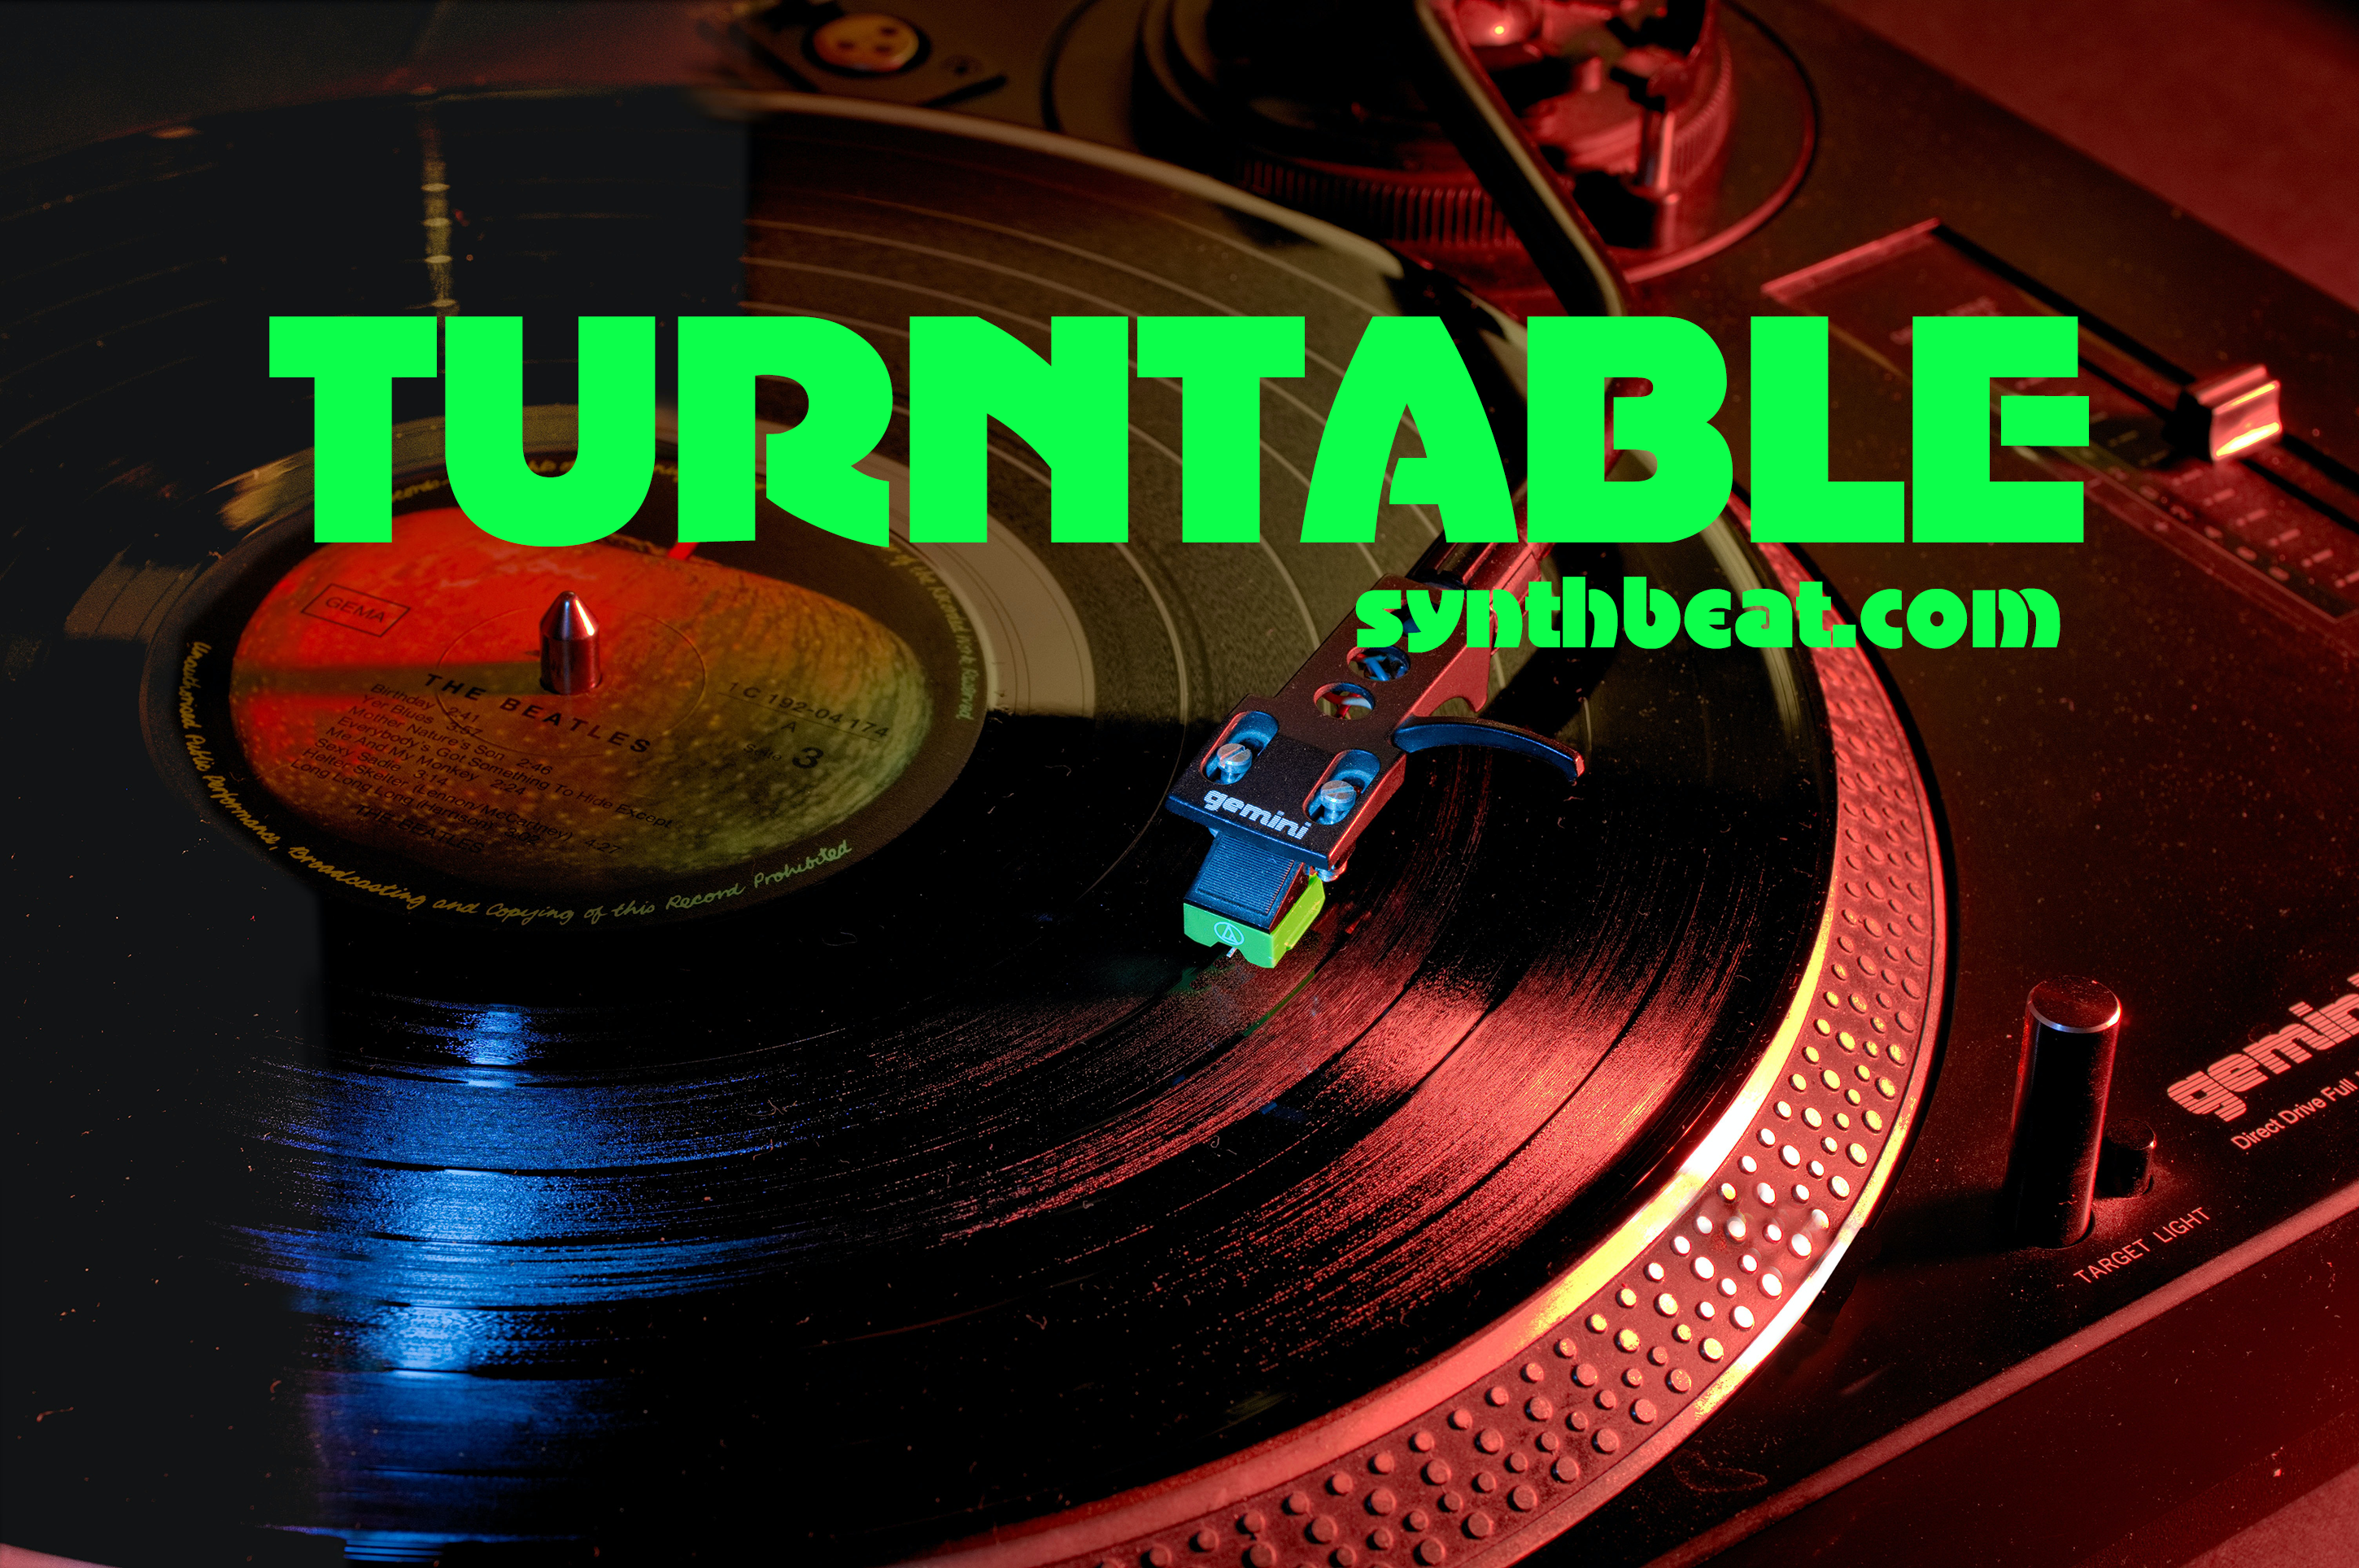 Synthbeat dot com presents Turntable, featuring some hot new electronic music tracks